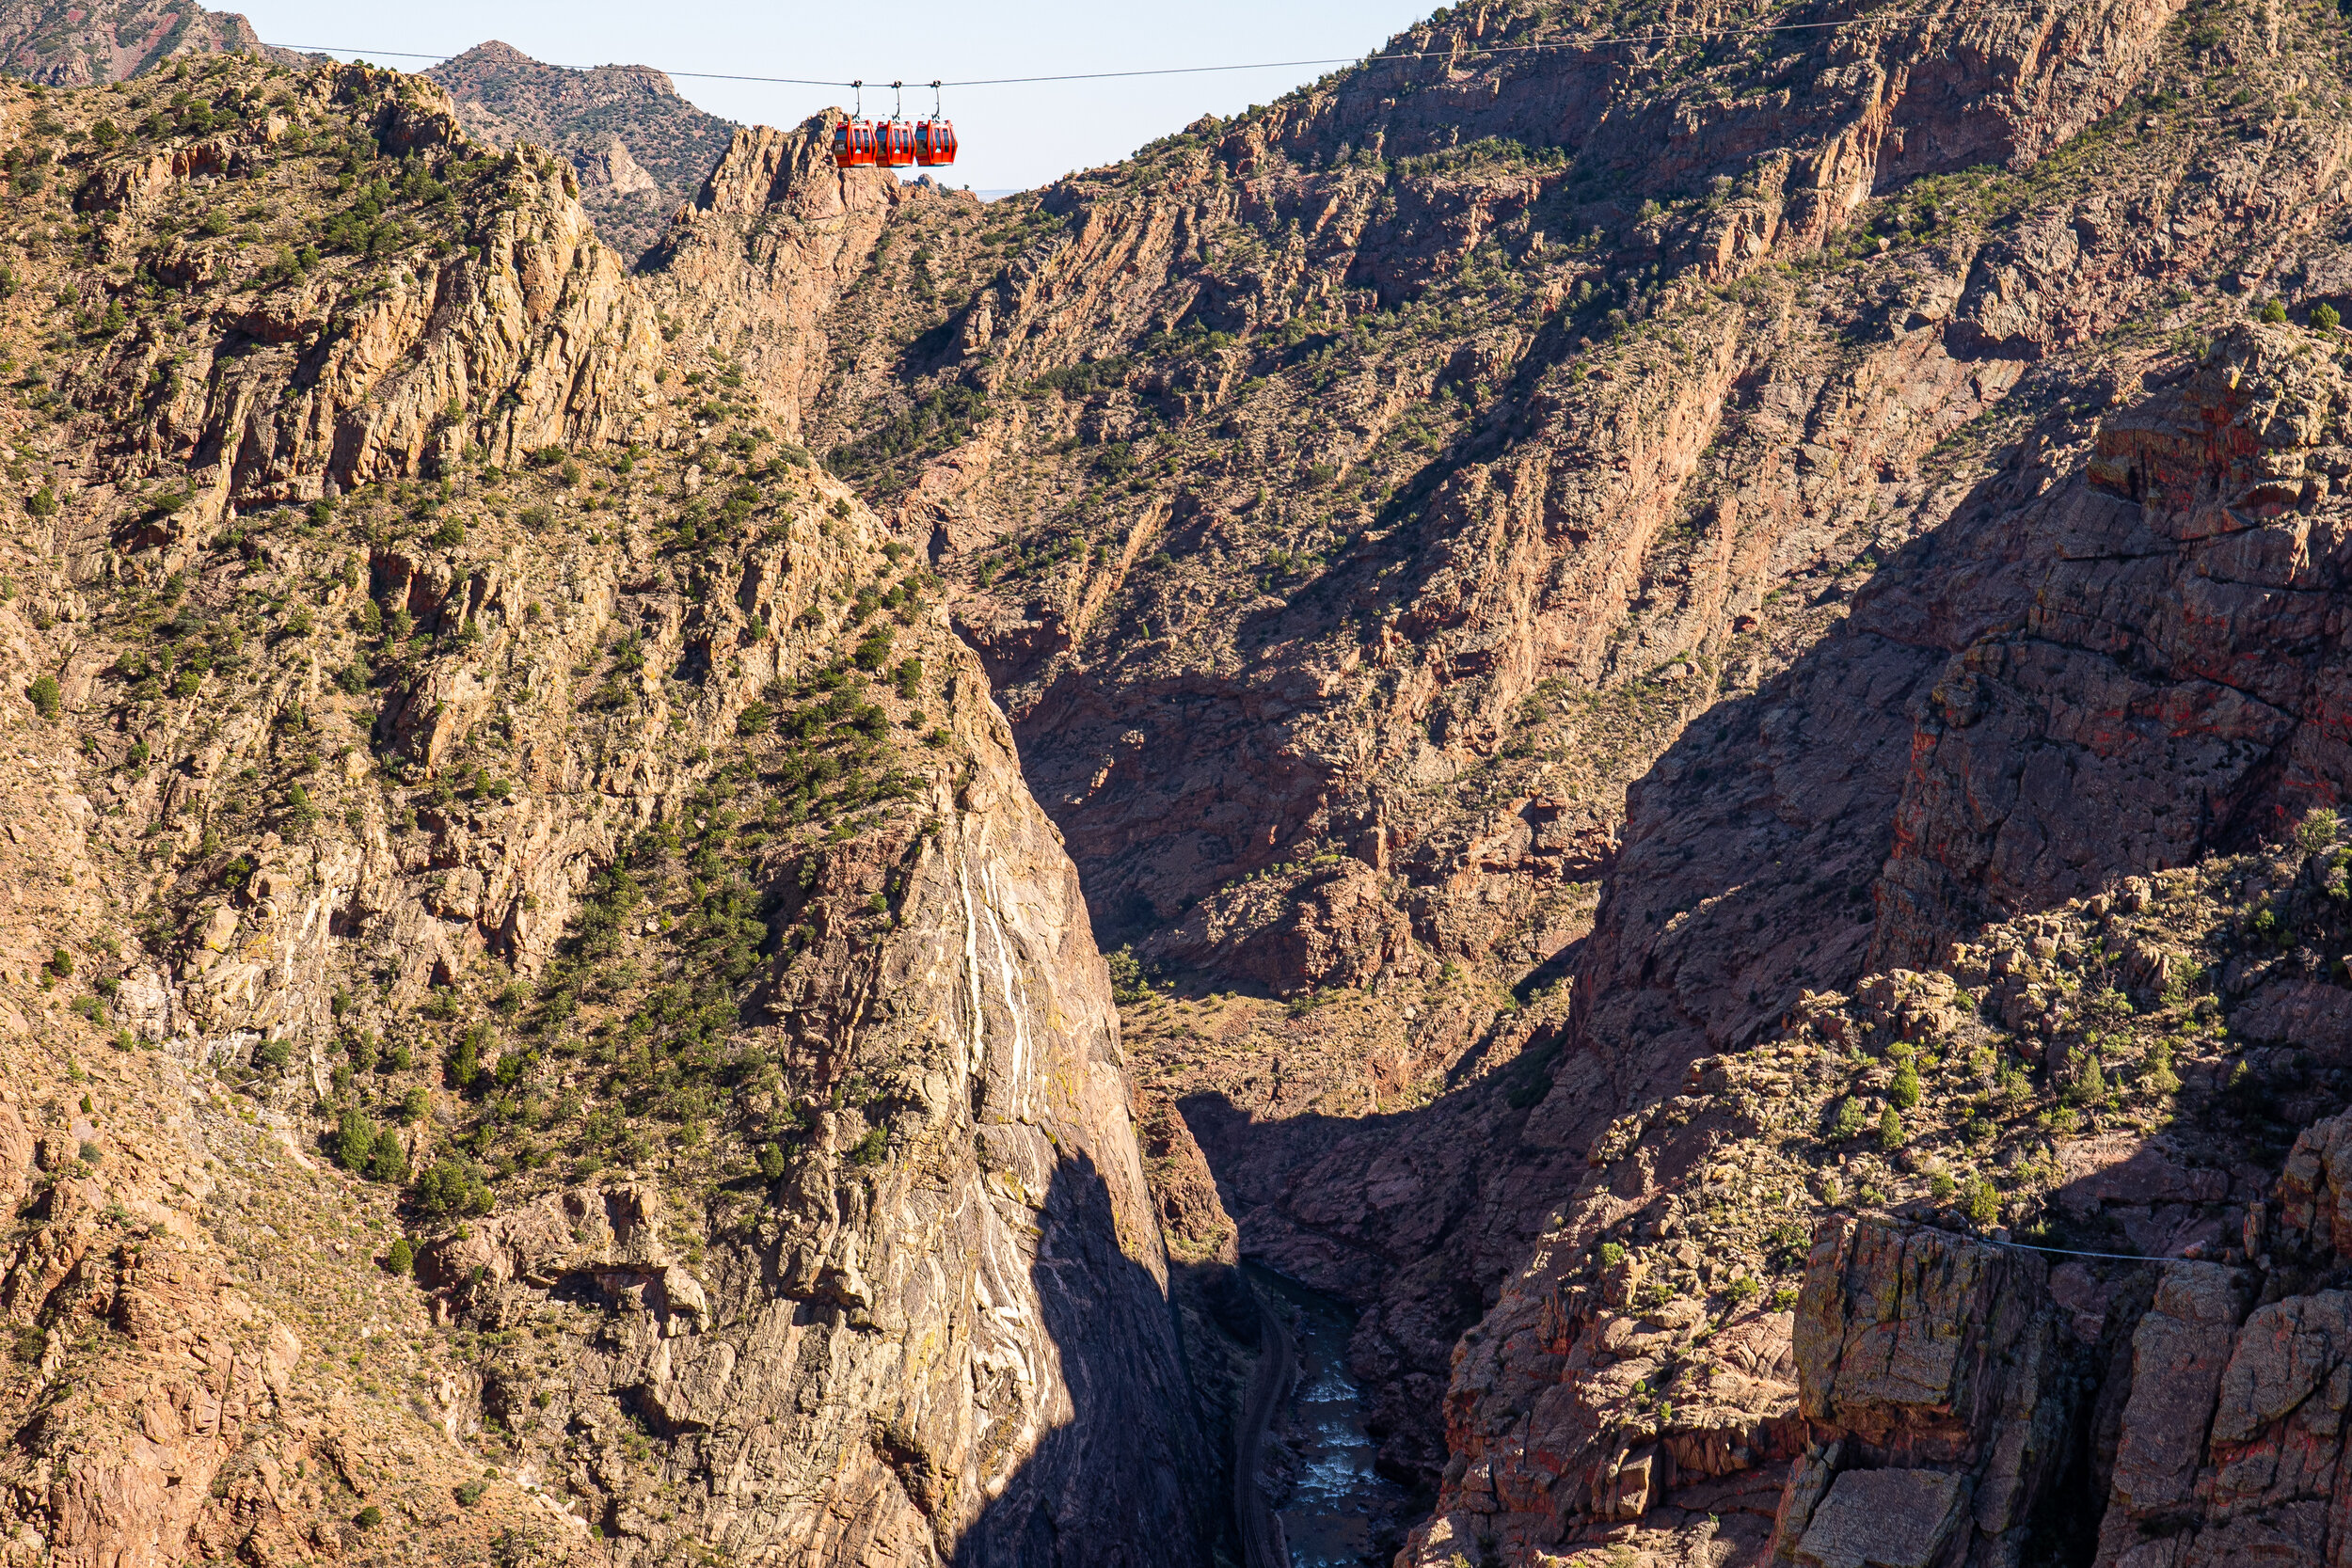  A fire that caused only minimal damage to the bridge's wood plank floor destroyed the entire Royal Gorge park and amusement area in 2012. Fourteen months later, the park reopened with many new features, including this gondola (at the very top of the